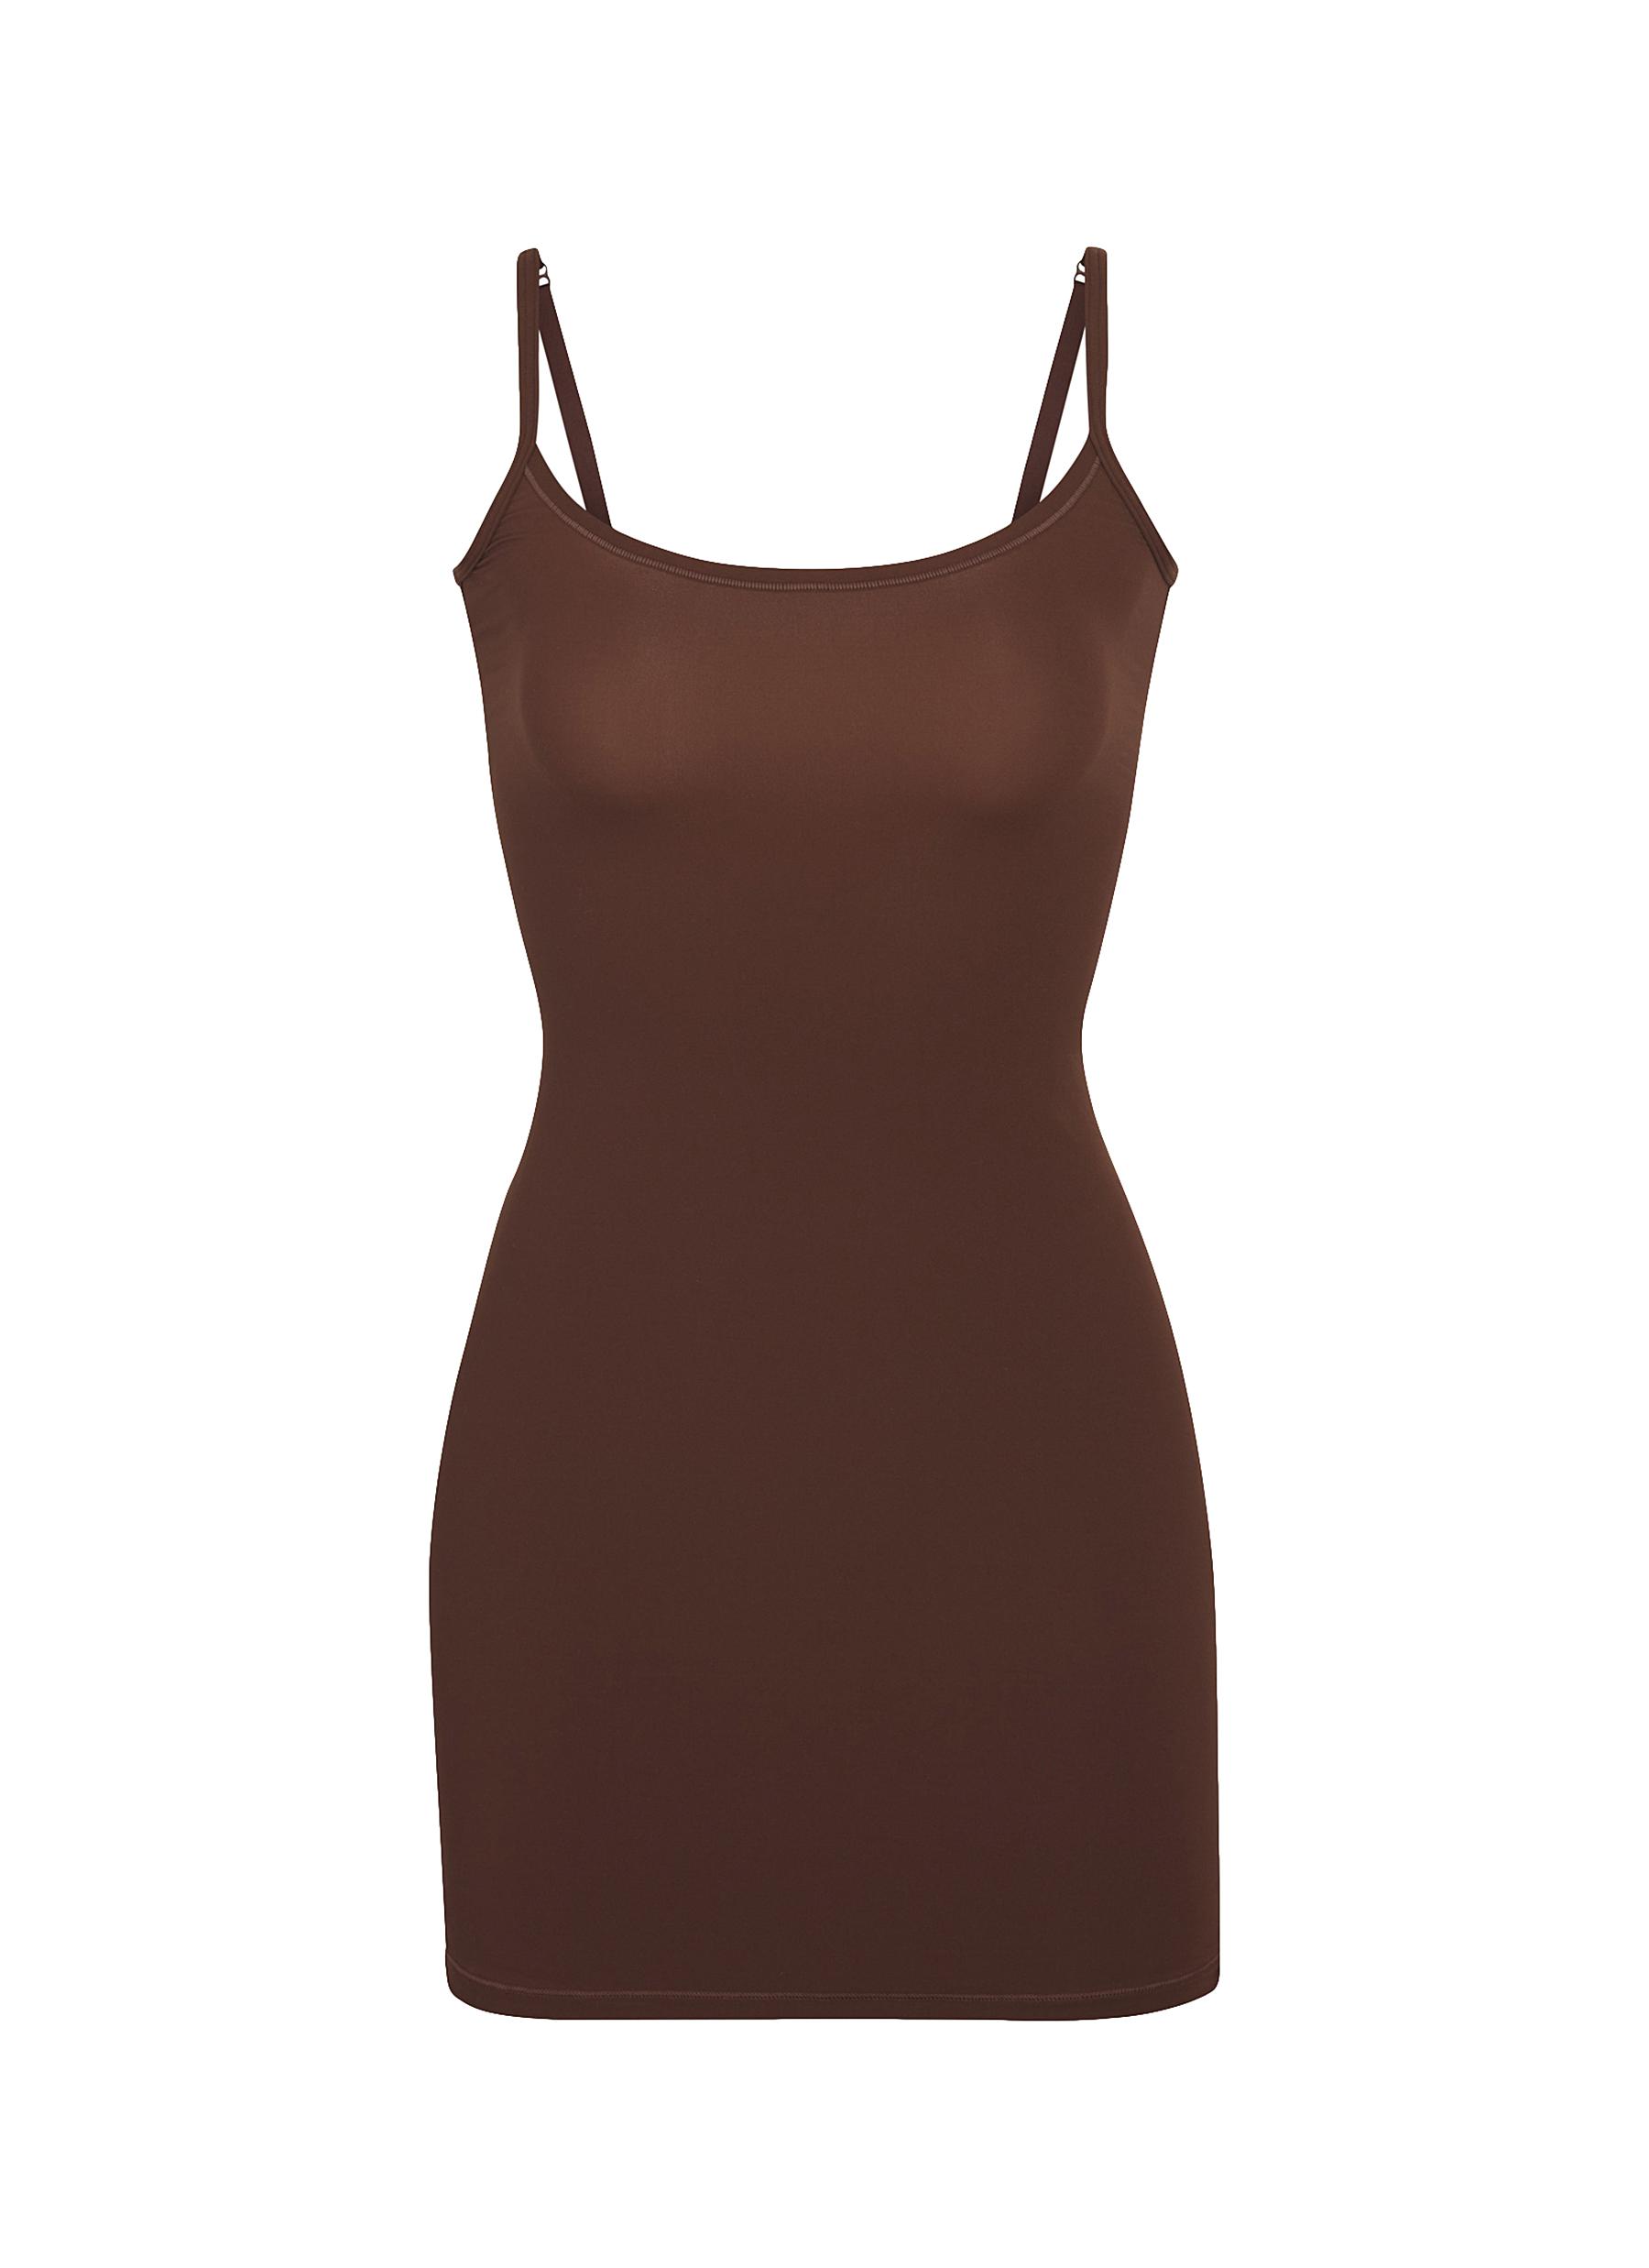 Free People Slip Dress: The Sexy Mini For Summer & Fall - The Mom Edit